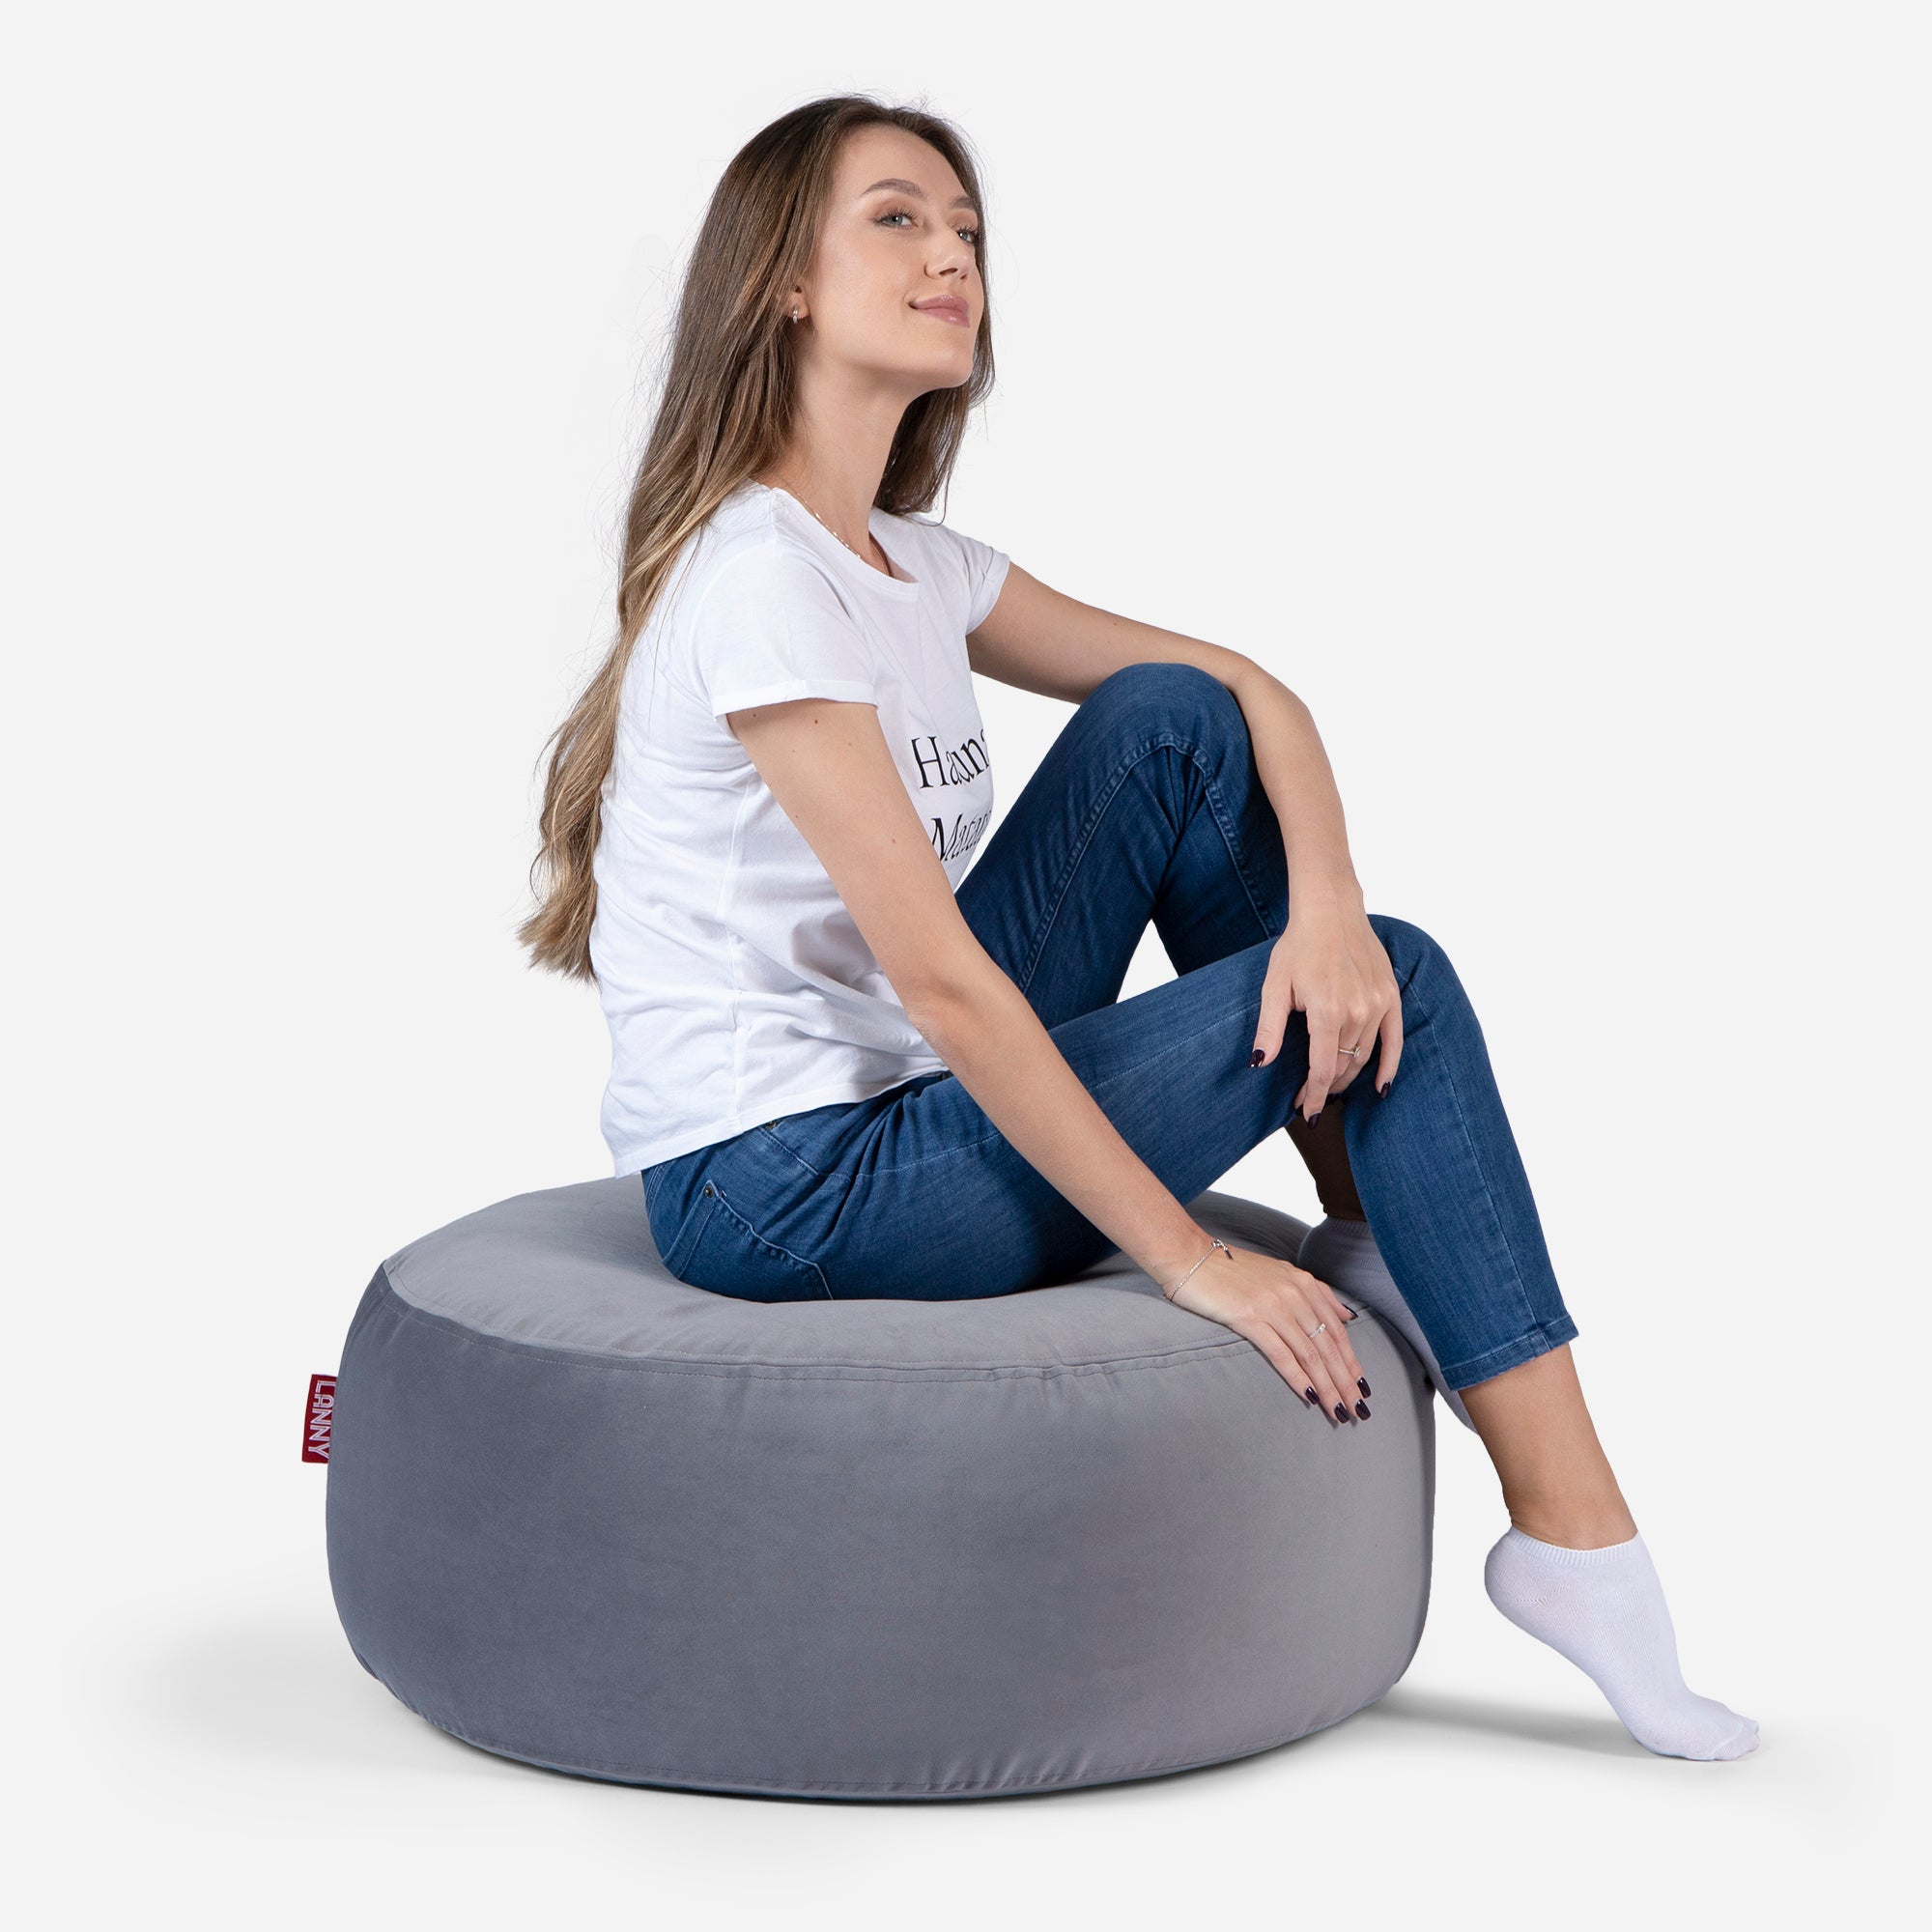 girl siting on Lanny pouf made from velvet fabric in Gray color